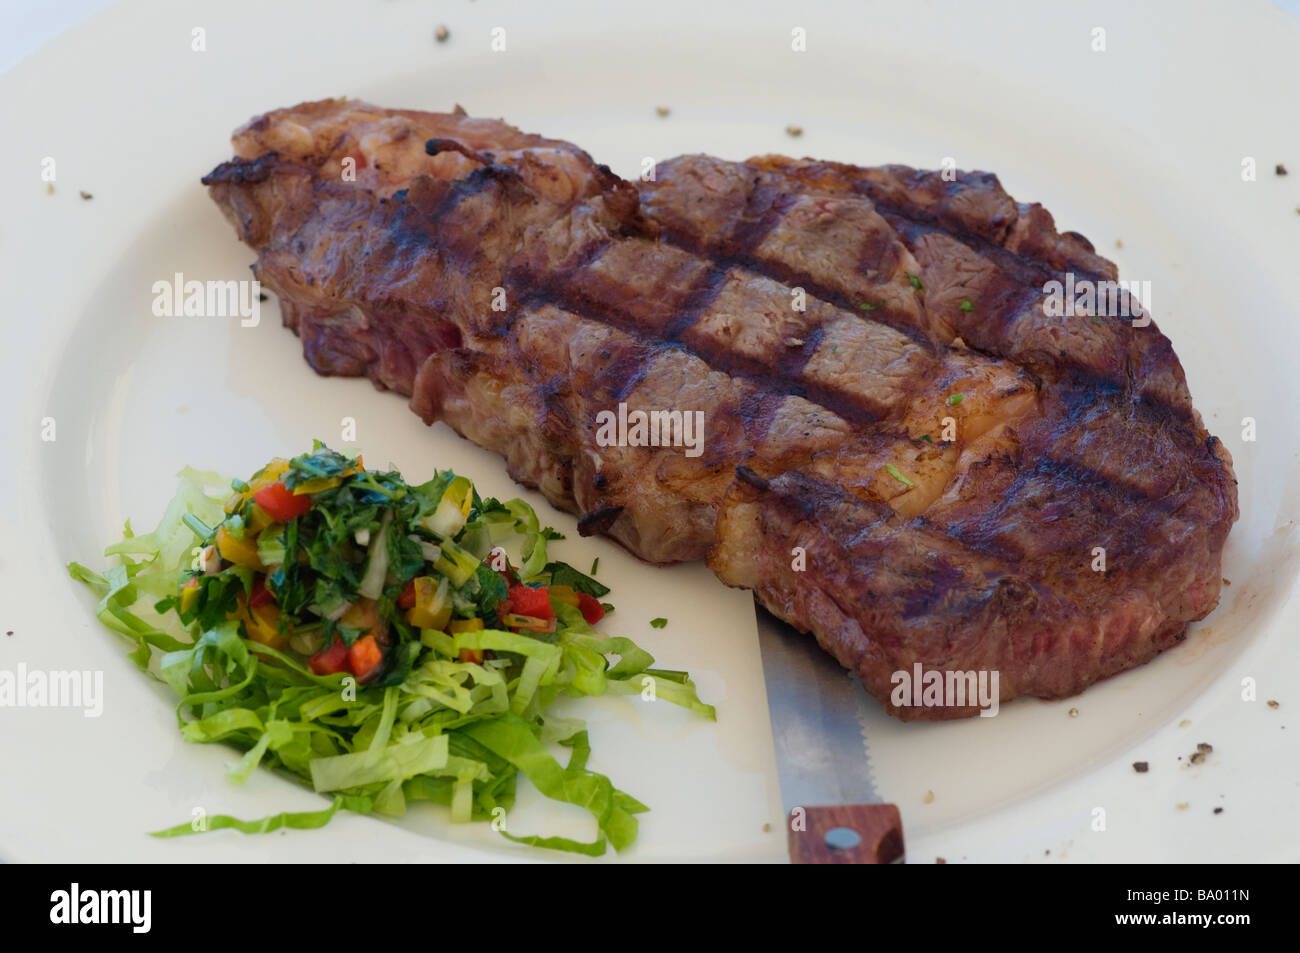 Detail of a juicy prime rib entrecote steak with vegetable salad Stock Photo